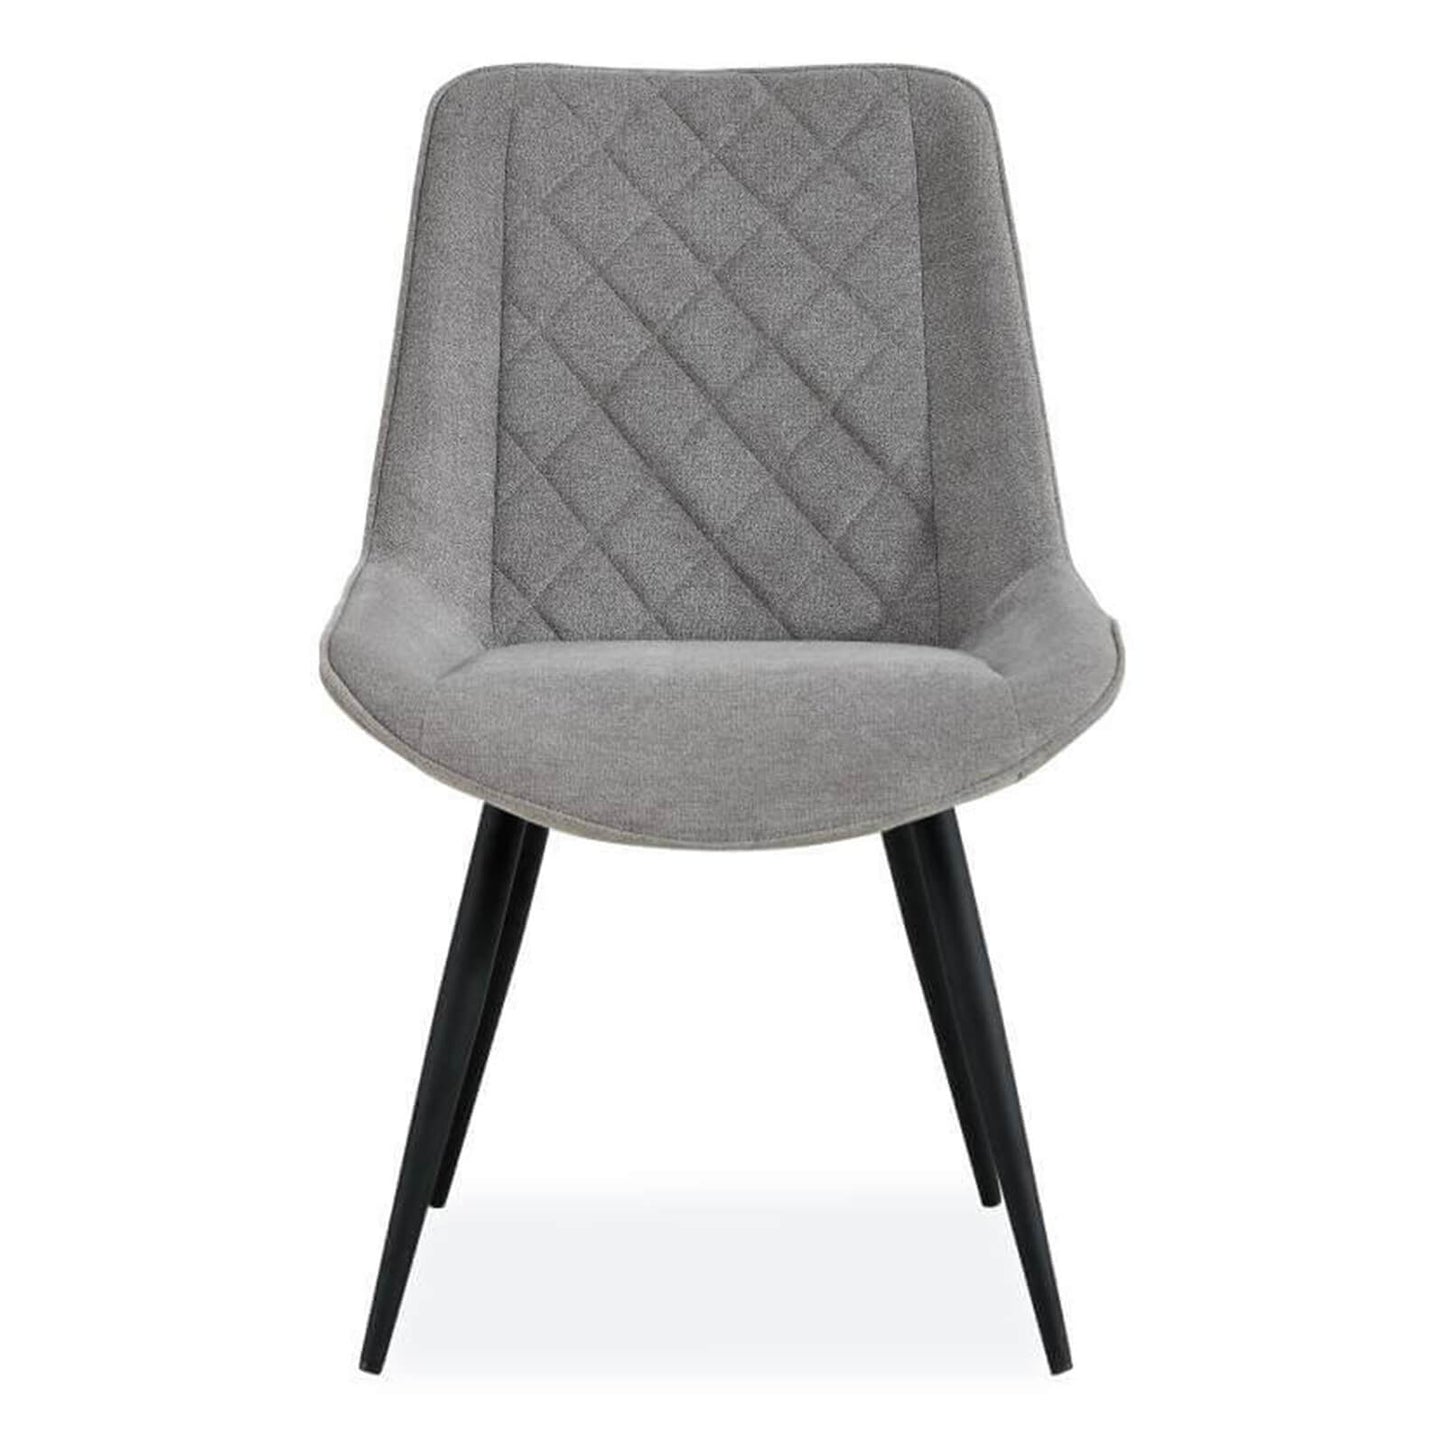 Southbank | Fabric Contemporary Dining Chairs With Arms | Set Of 2 | Granite